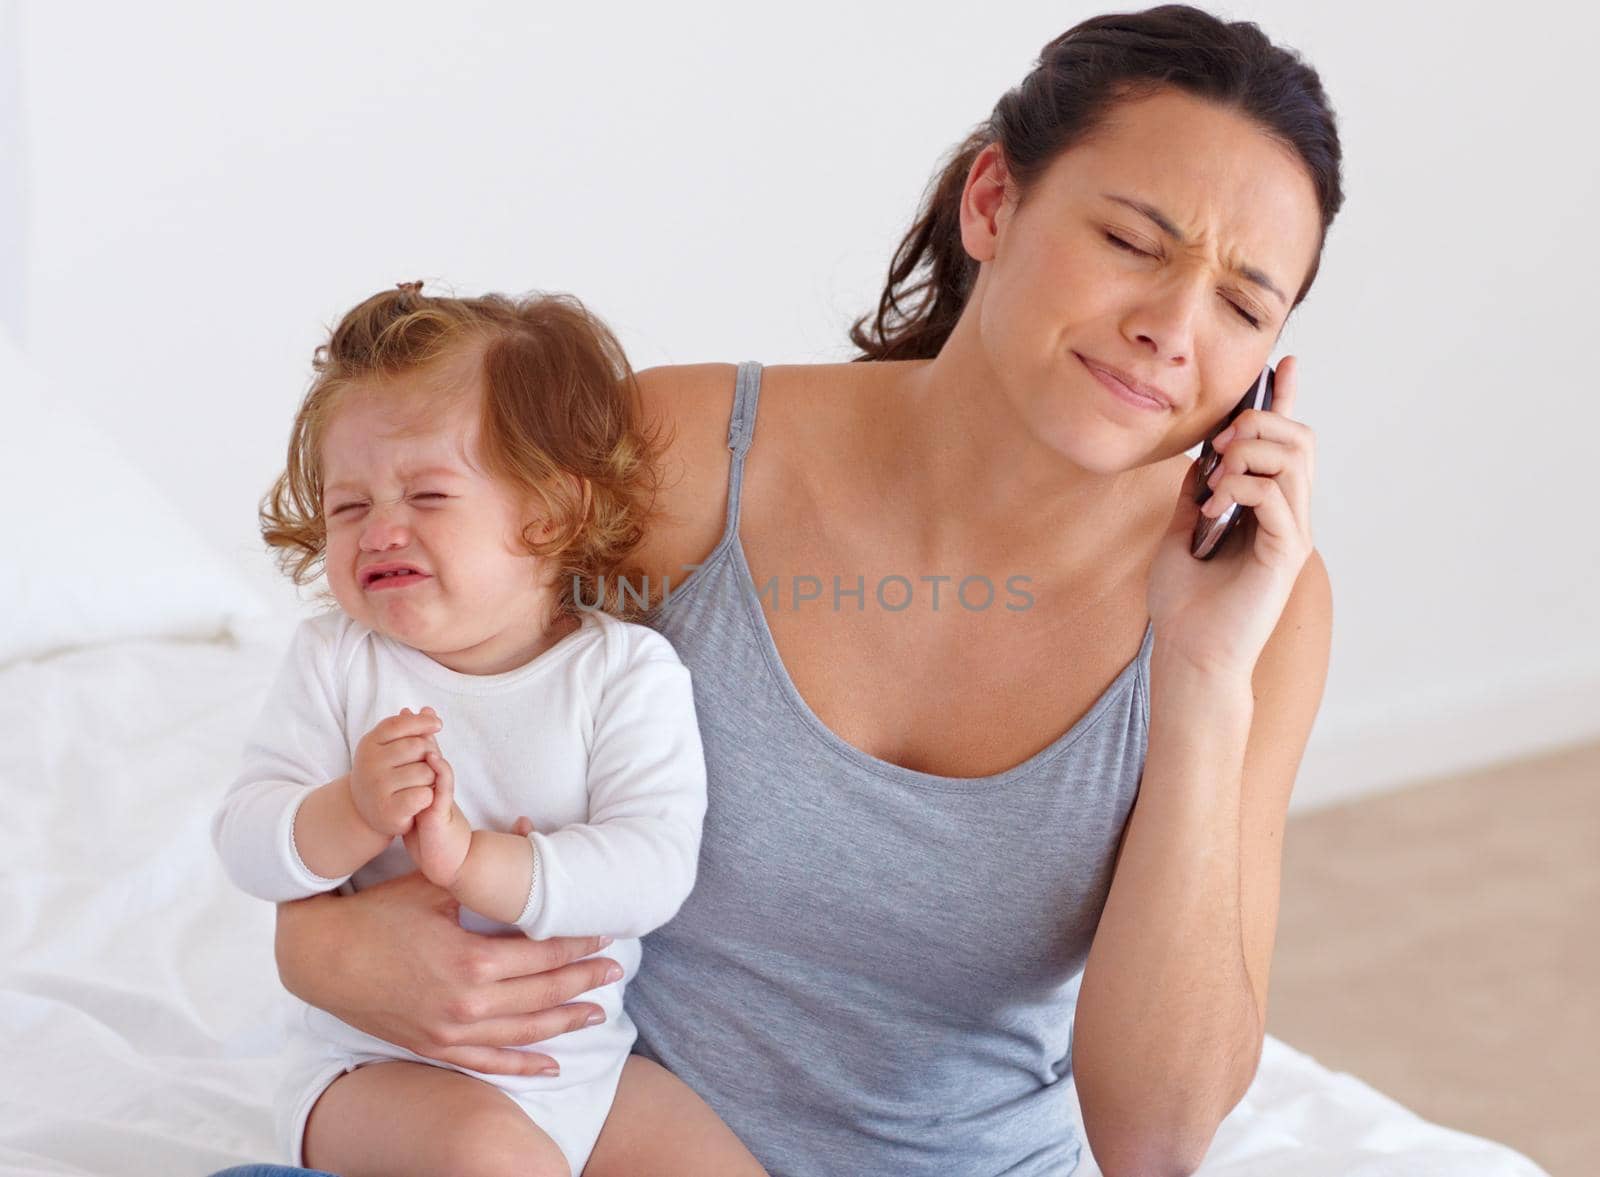 A mother trying to have a phone conversation while her baby is crying in the background.